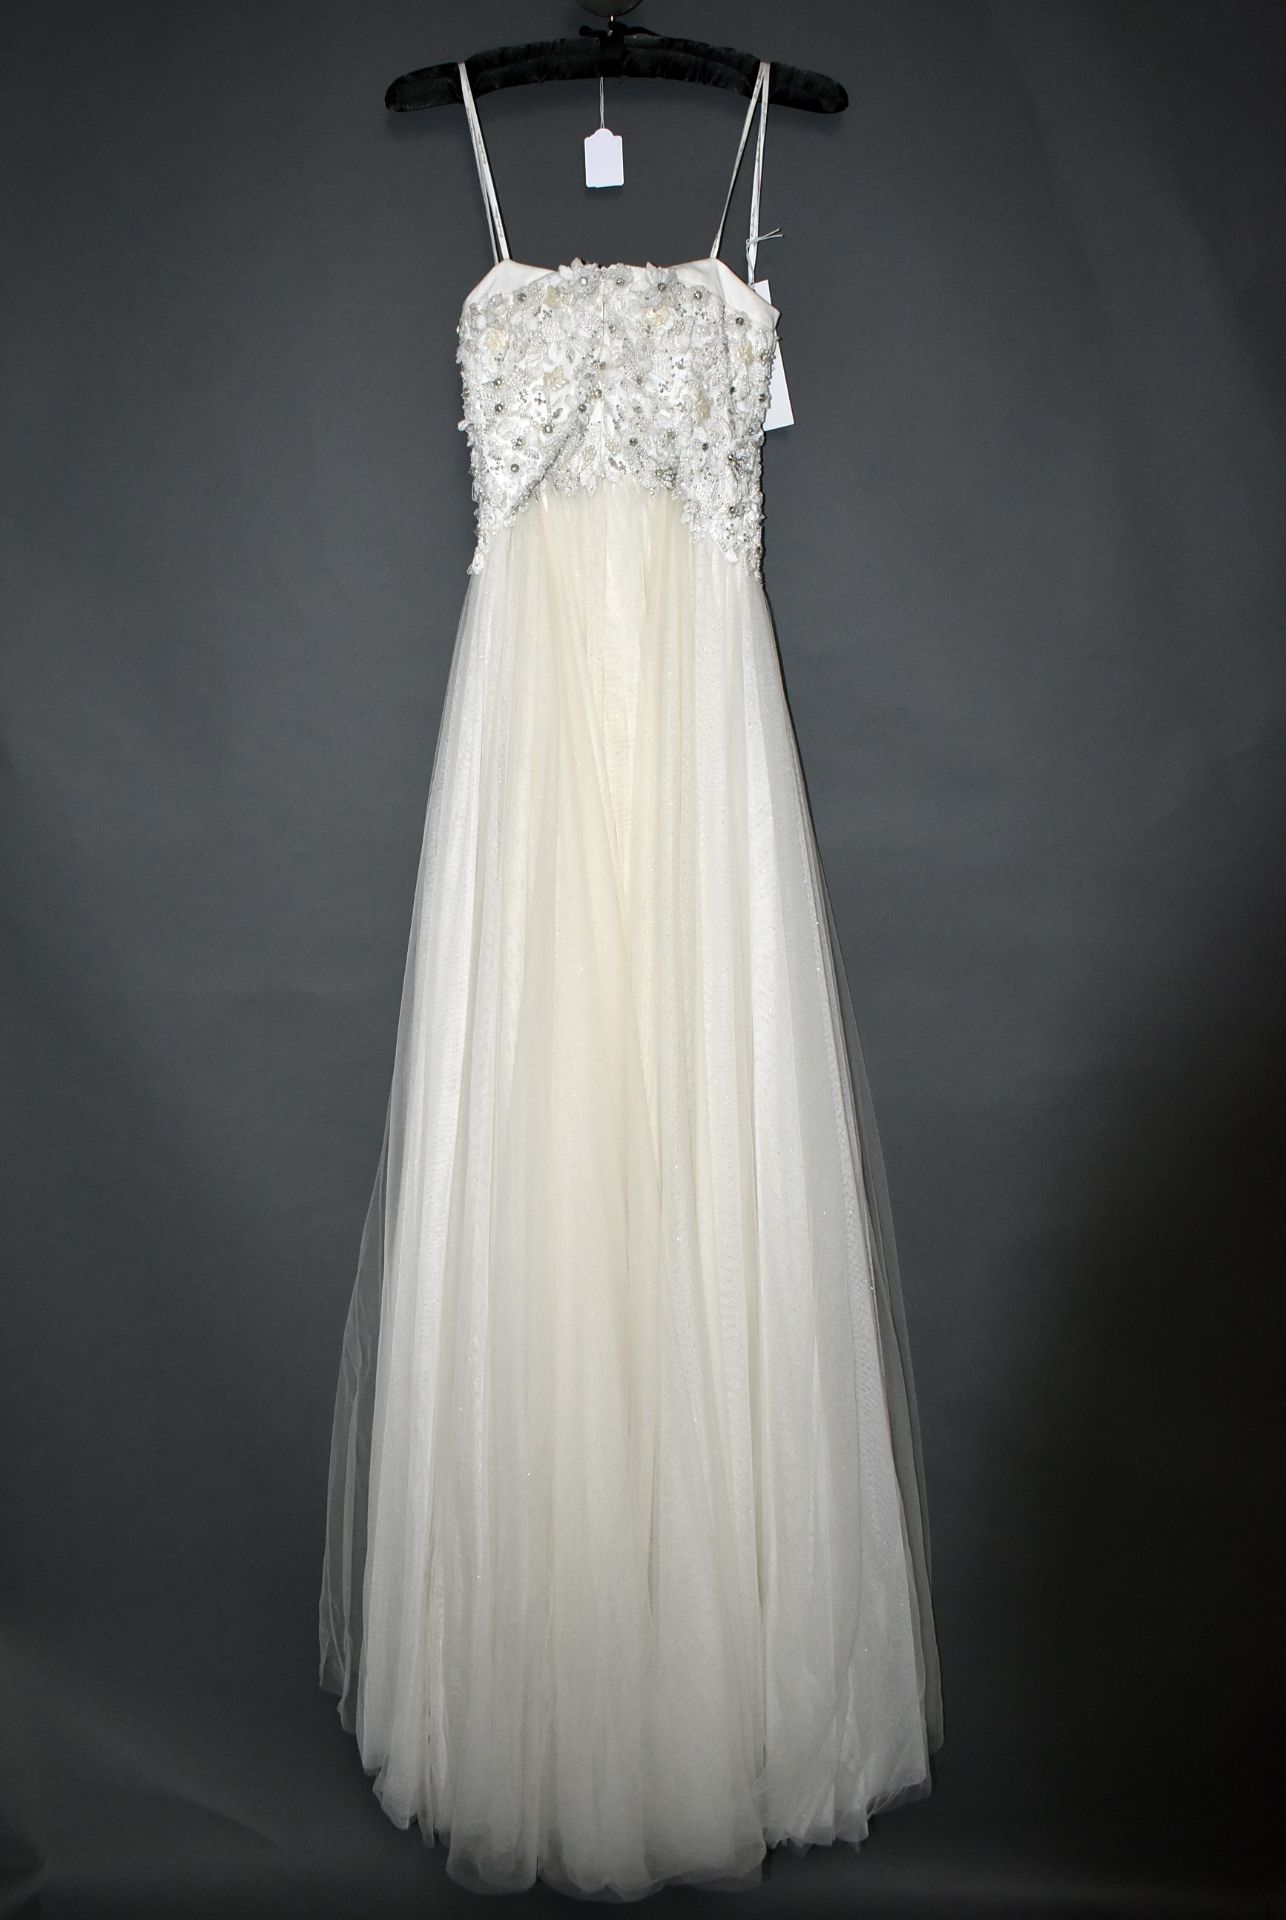 1 x ELIZA JANE HOWELL Lace And Beaded Strapless Designer Wedding Dress Bridal Gown RRP £1,000 UK 12 - Image 5 of 7